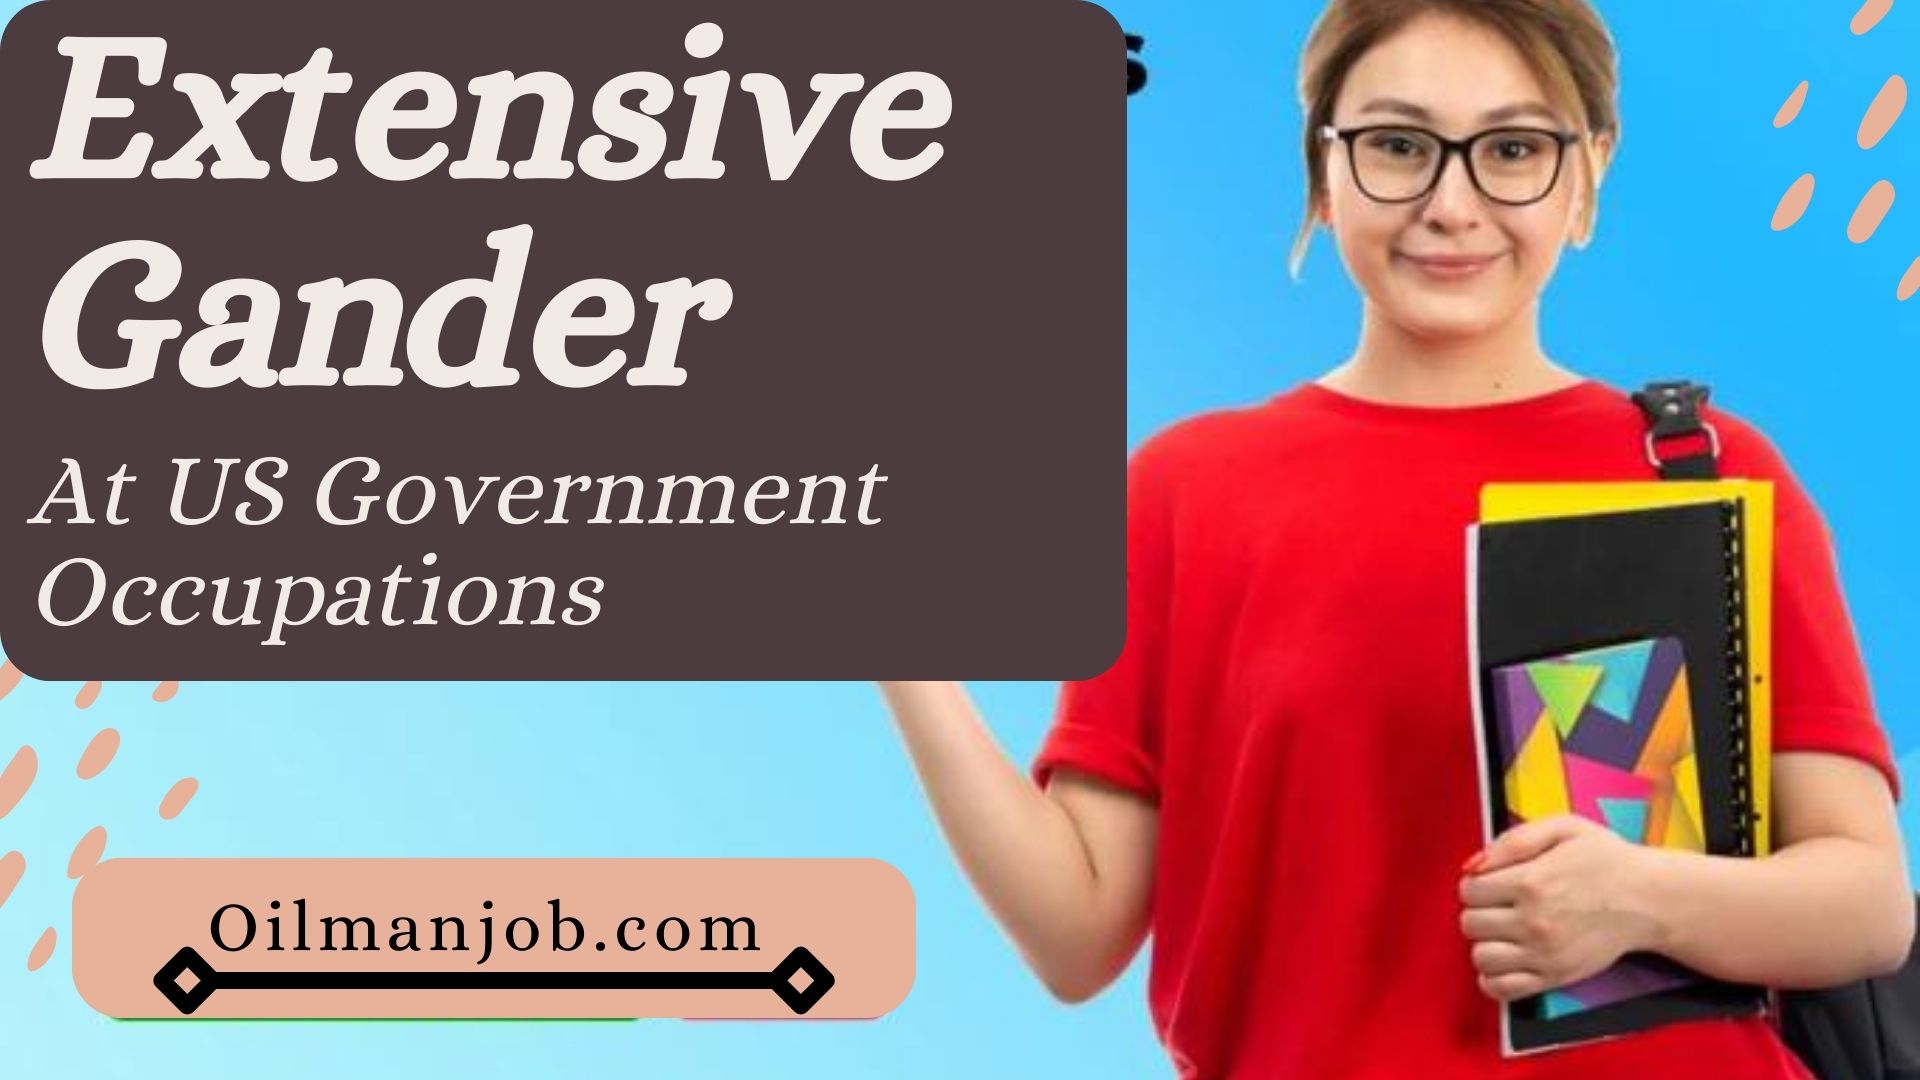 Extensive Gander at US Government Occupations